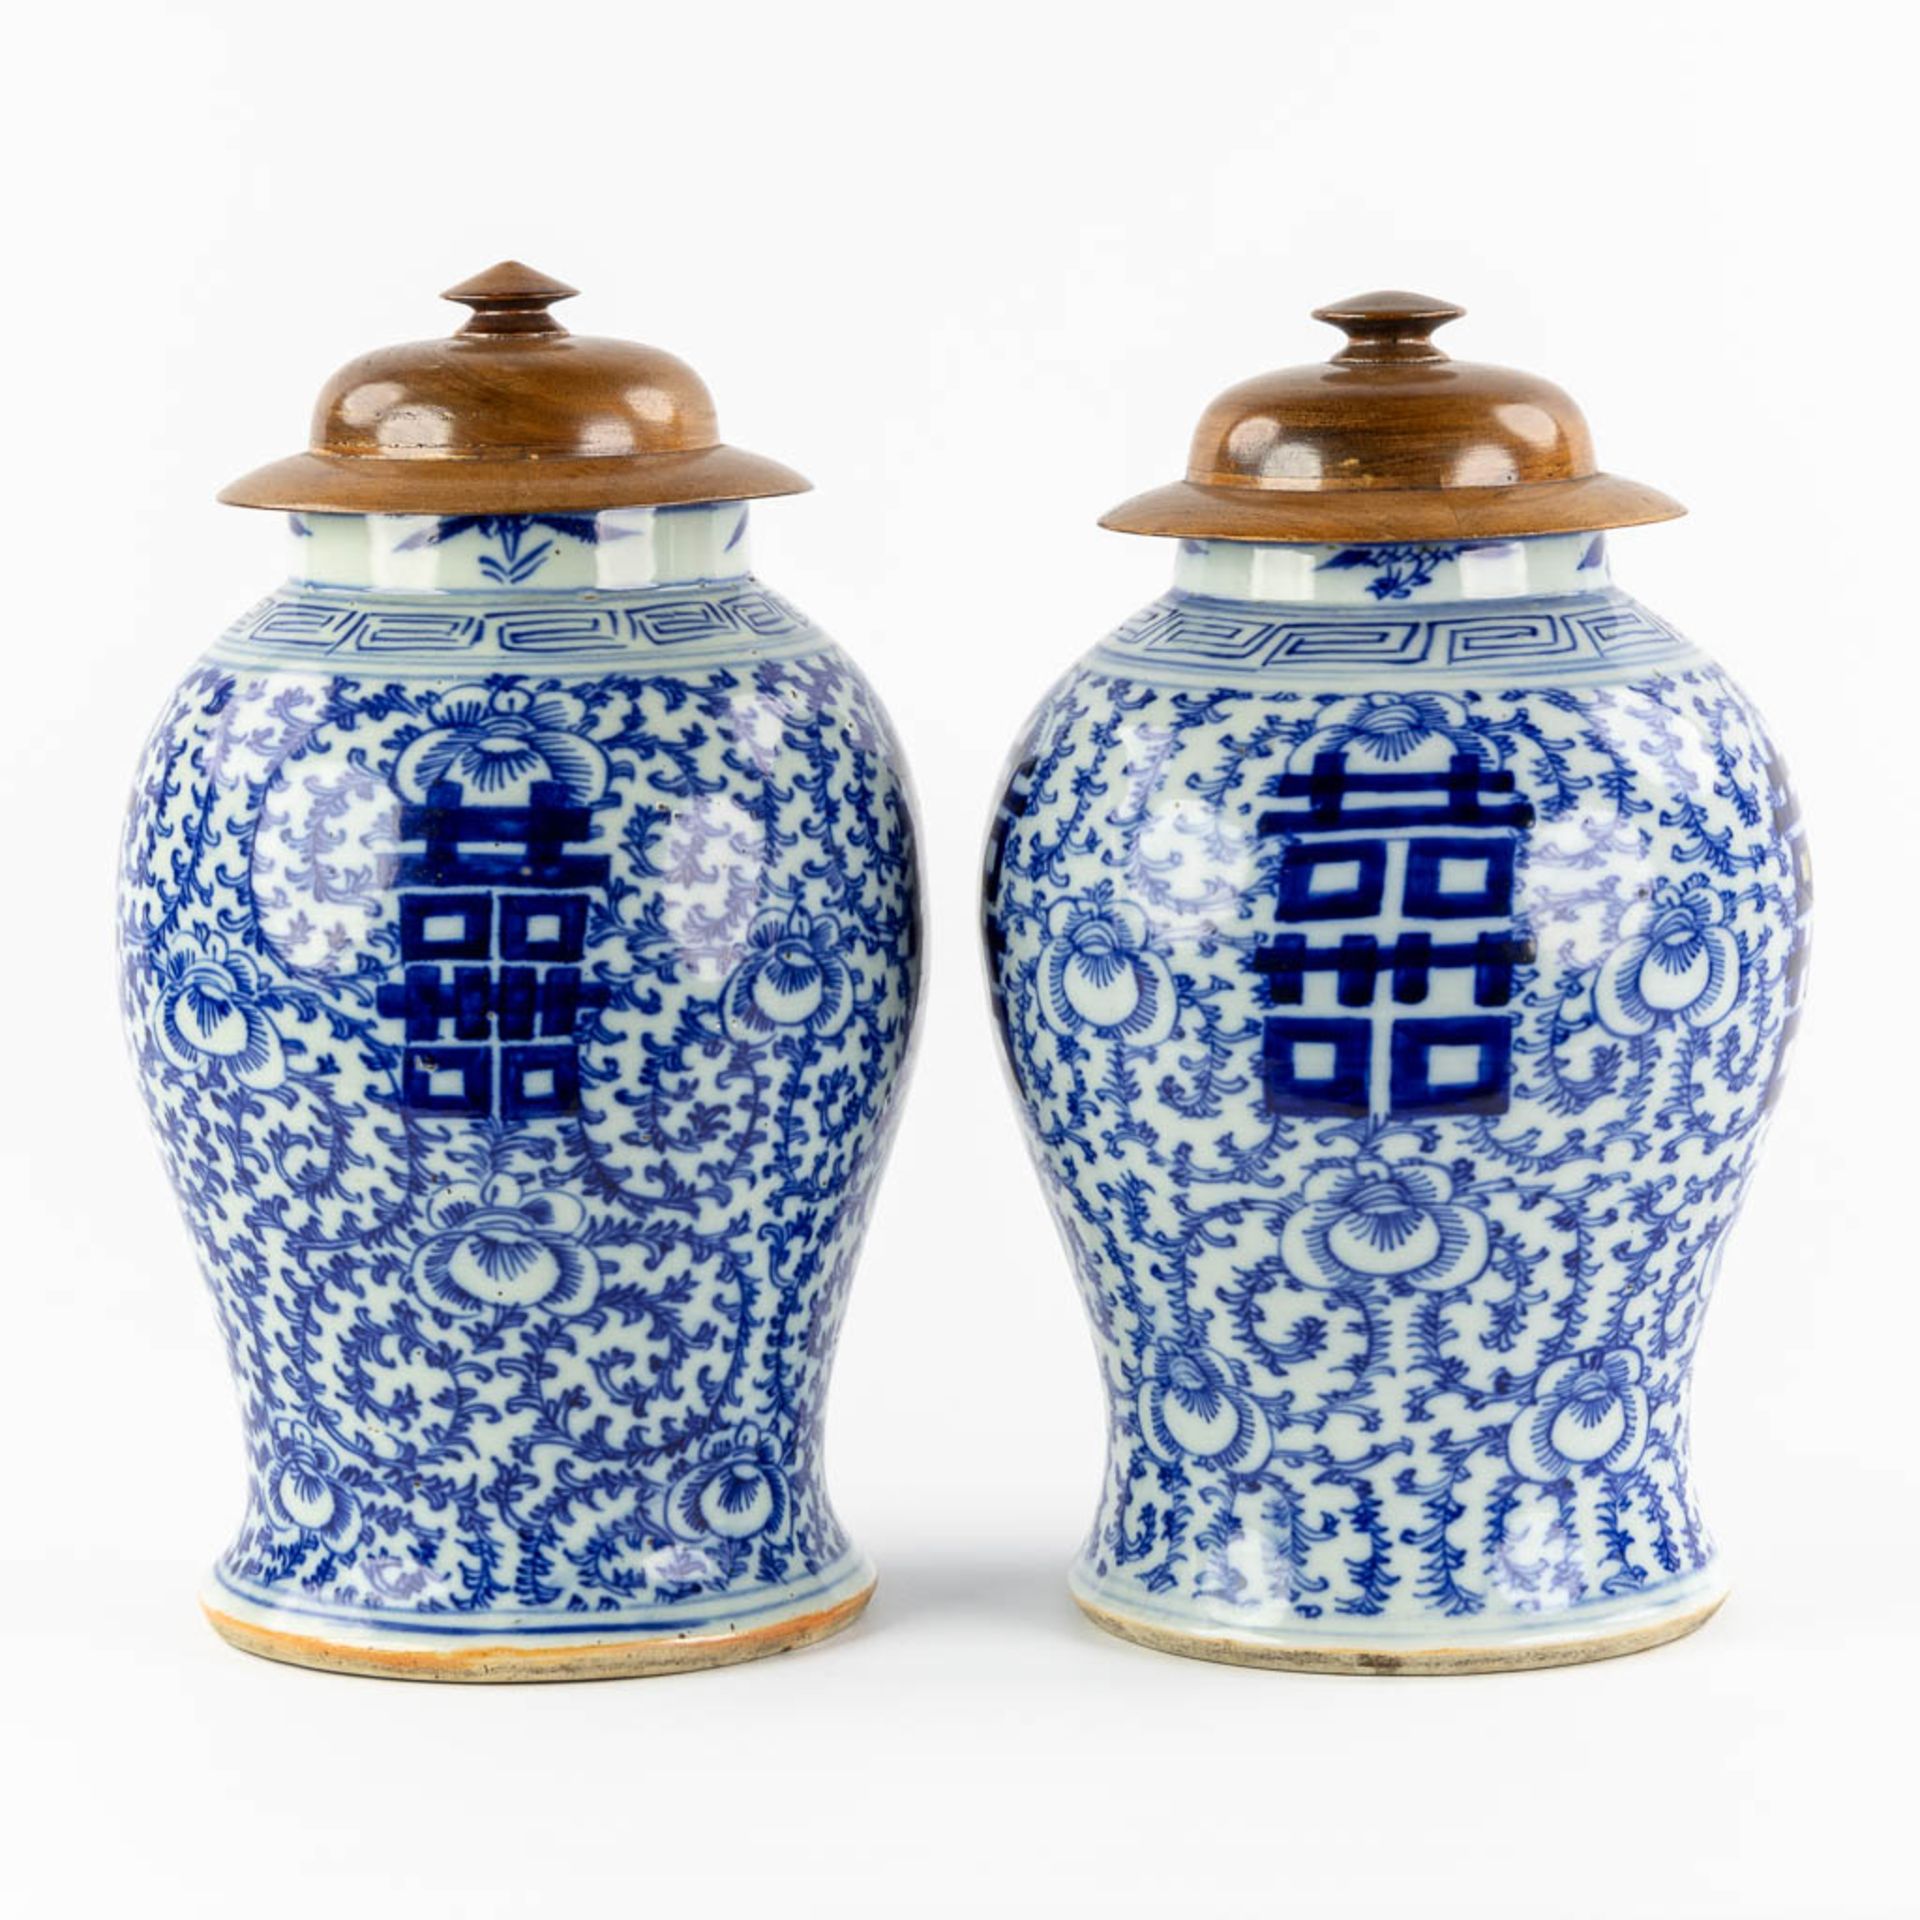 A pair of Chinese vases with a blue-white decor and a Double Xi-sign. 19th/20th C. (H:41 x D:26 cm) - Image 5 of 8